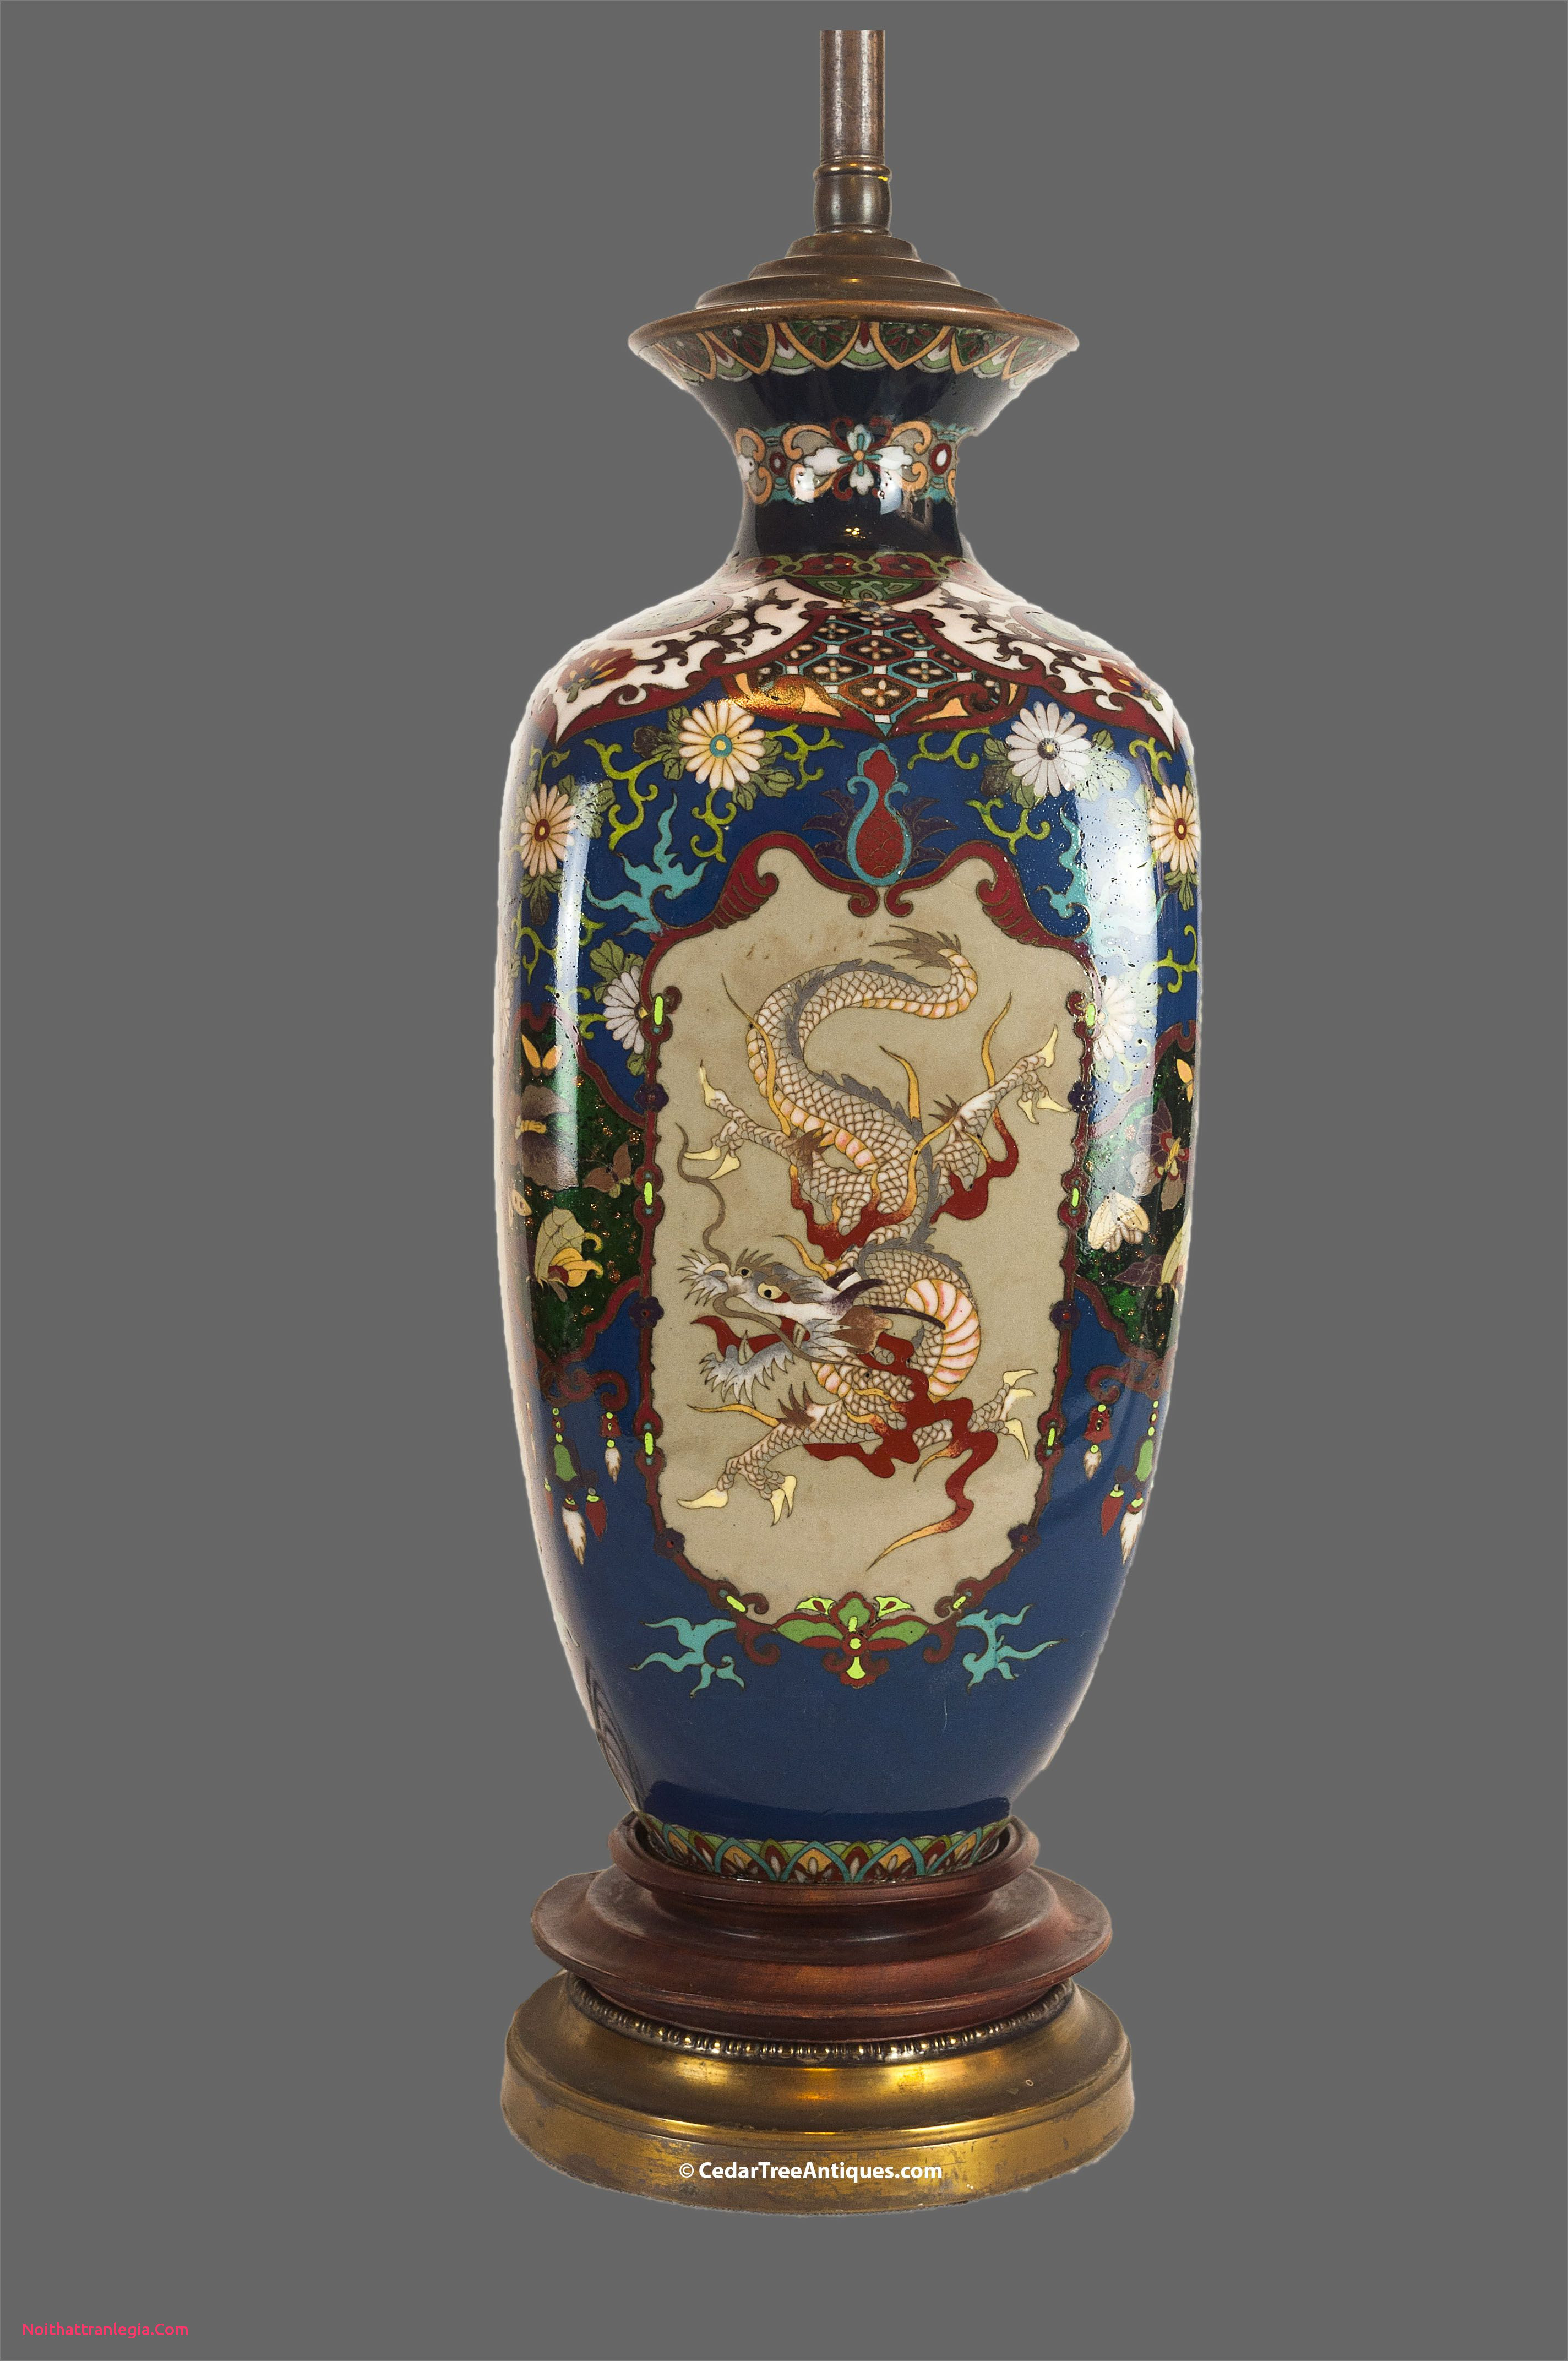 15 Recommended Waterford Blue Crystal Vase 2024 free download waterford blue crystal vase of 20 chinese antique vase noithattranlegia vases design with japanese meiji period cloissone dragon vase mounted as a lamp